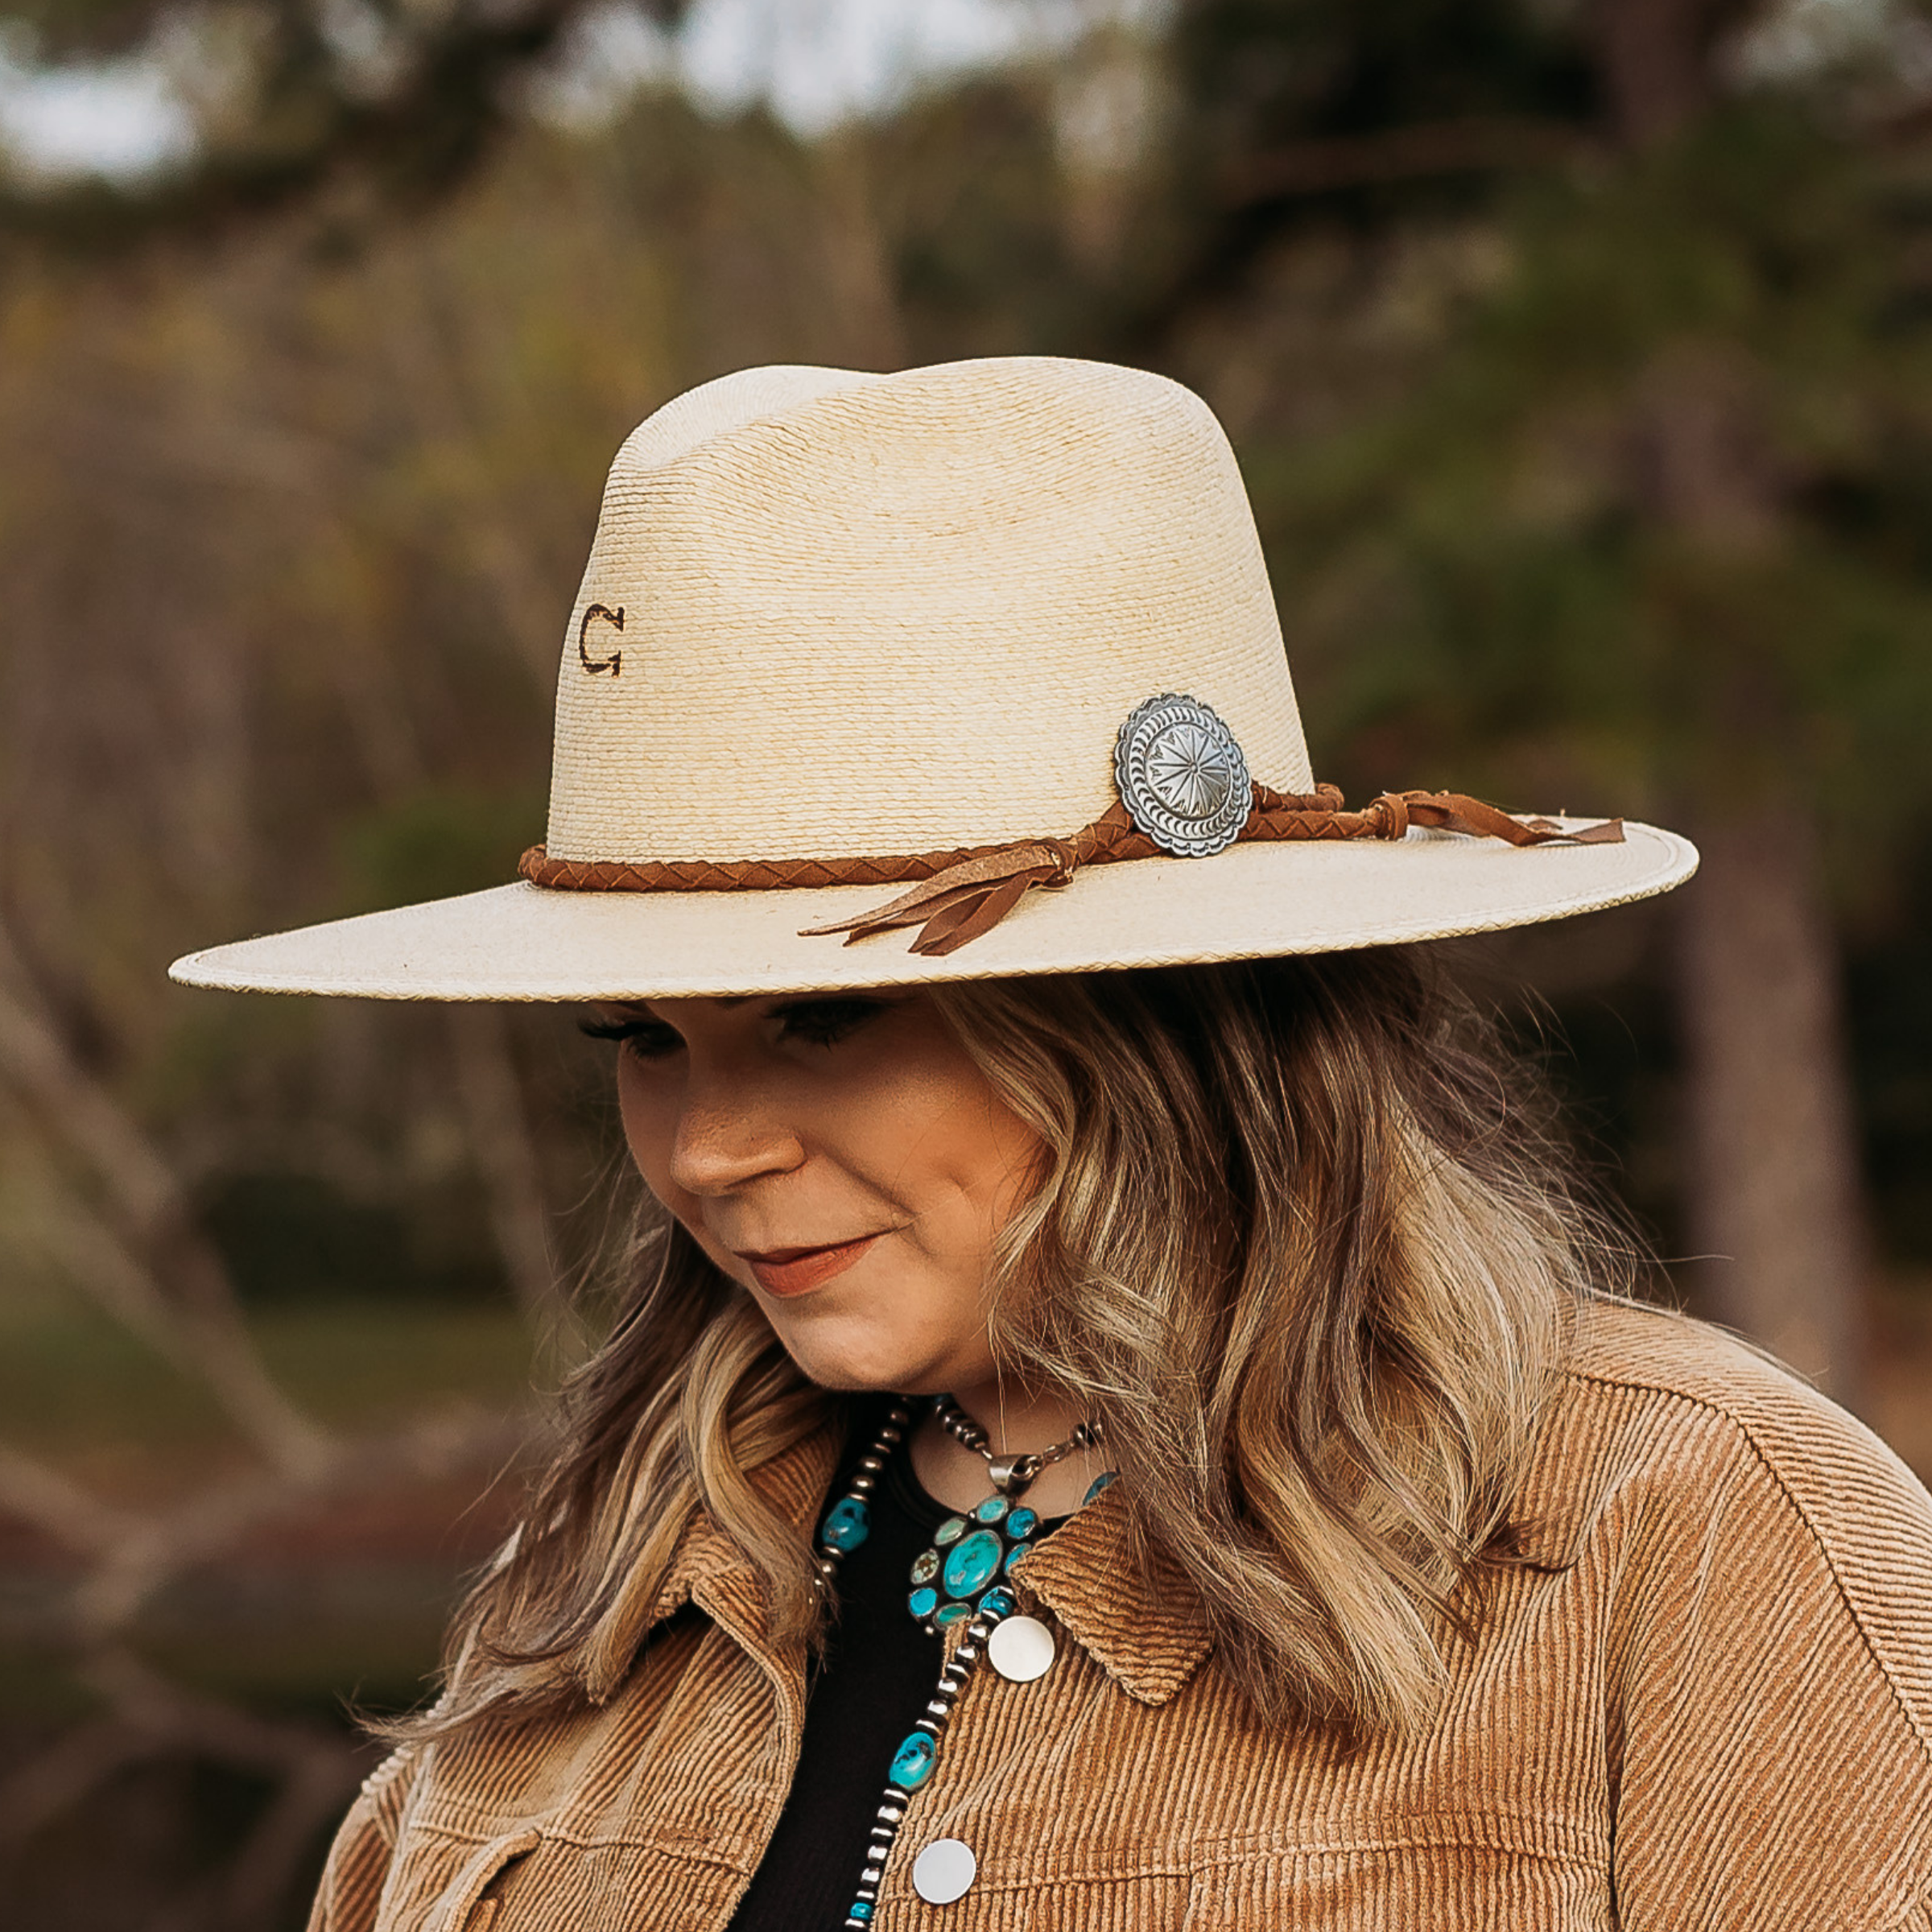 Off White Straw Hat with Braided Tan Hat Band, and a Silver Concho.. Model has it paired with a brown jacket and turquoise jewelry. Pictured on wooded background.